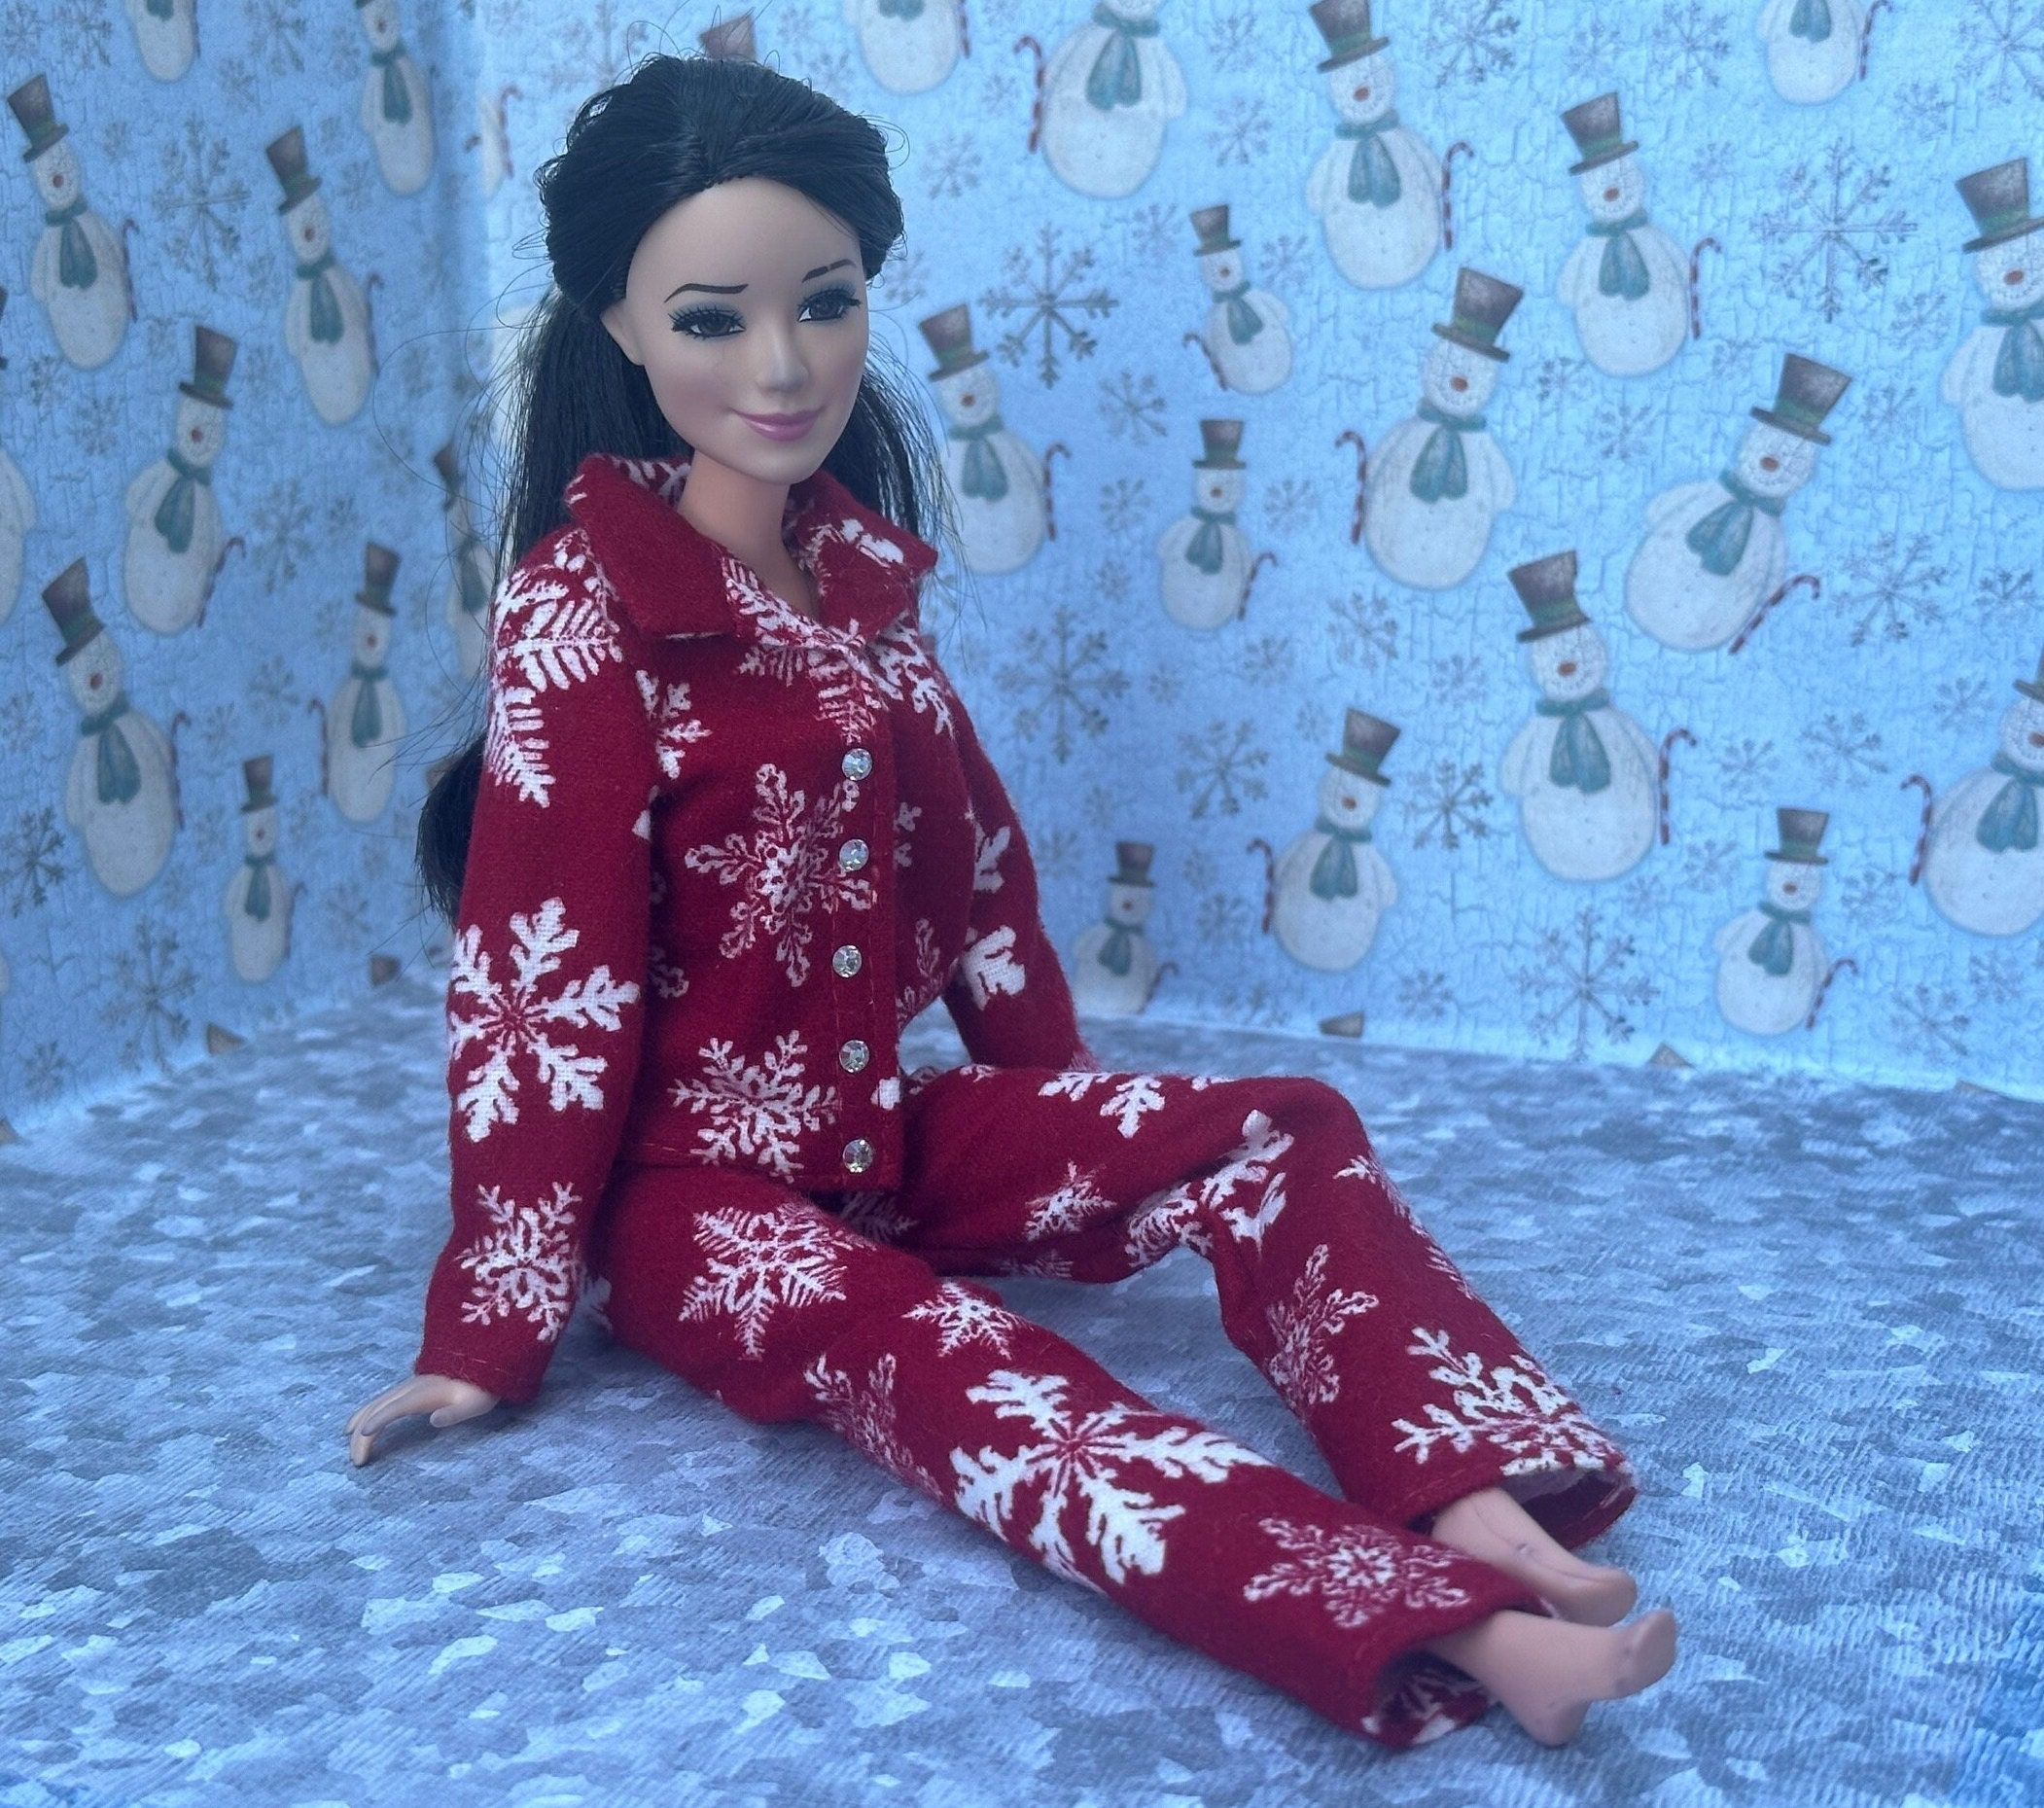 Handmade Fashion Doll Clothes 11.5 Fashion Doll Clothes for Regular, Curvy,  Ken and Sisters Blue Christmas Gingerbread Barbie Pajamas 